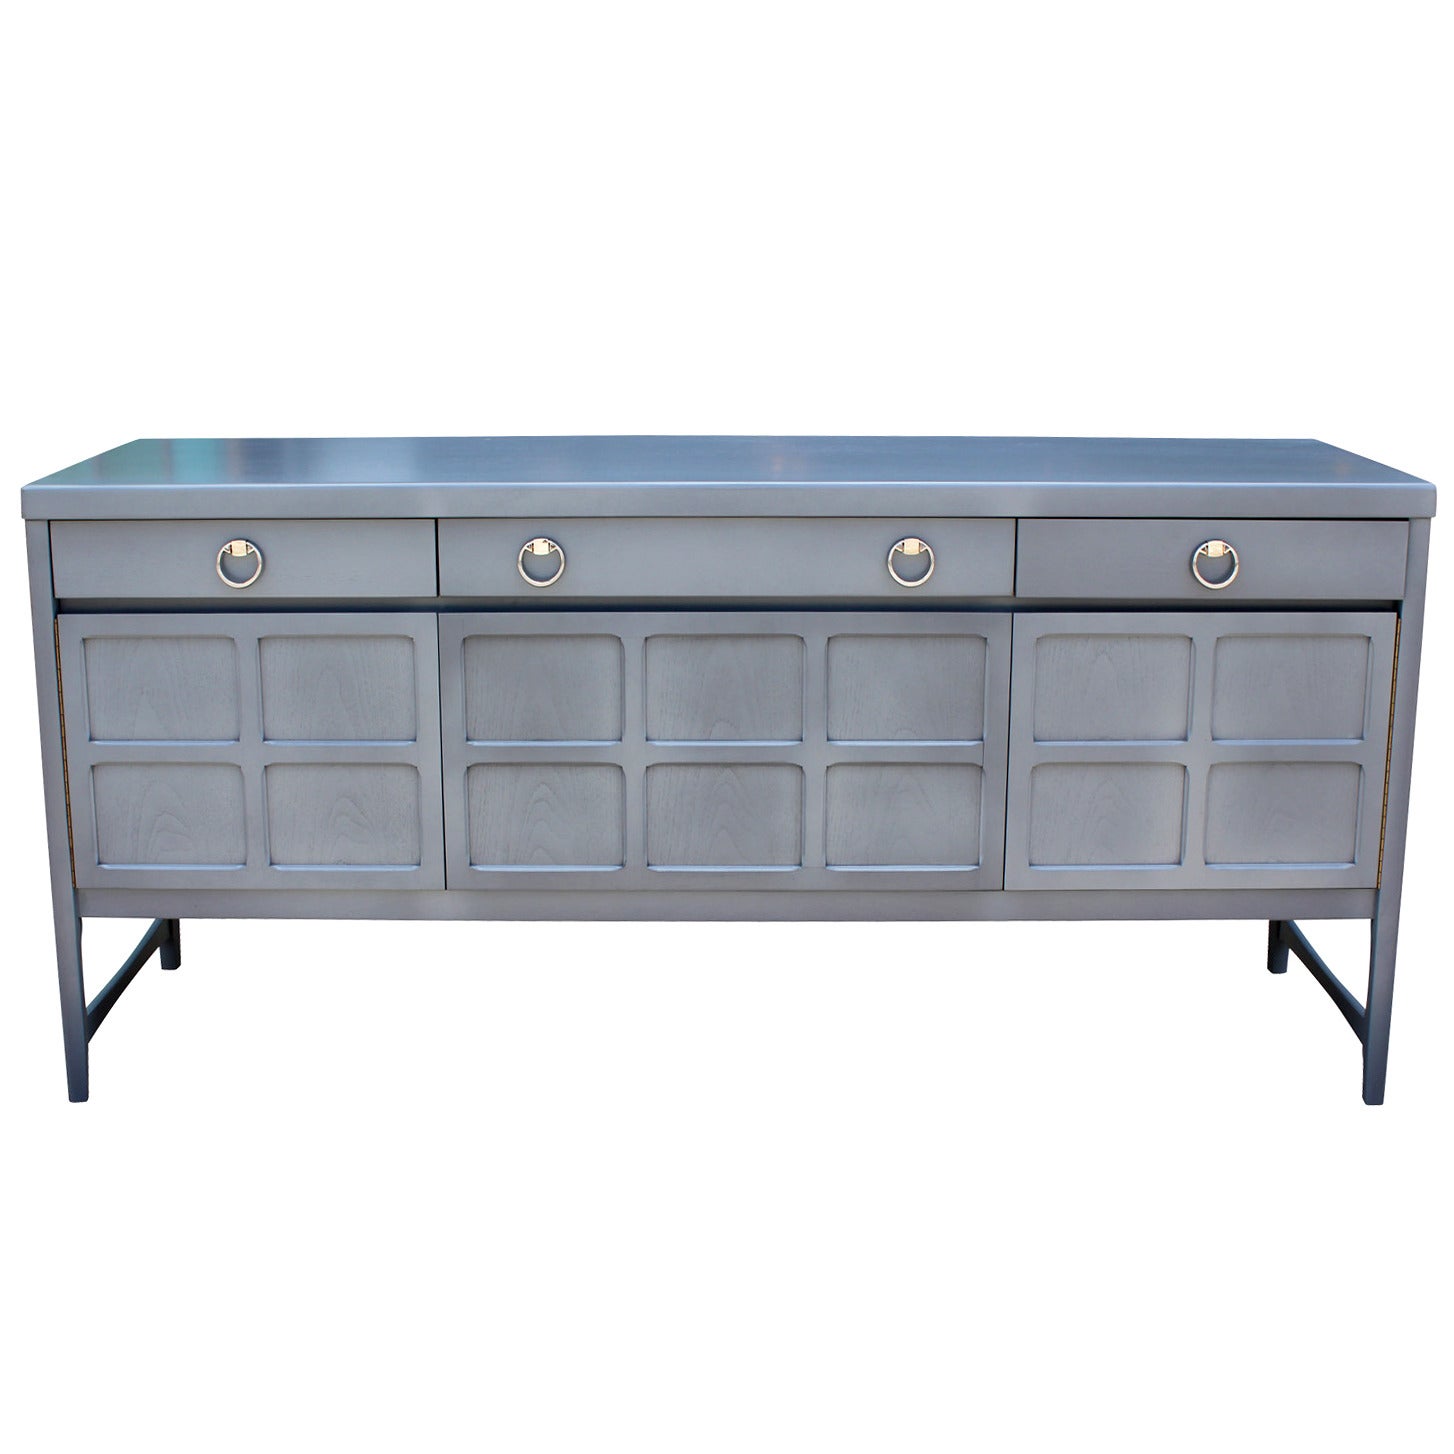 Light French Blue-Grey Sideboard with Chrome Handles